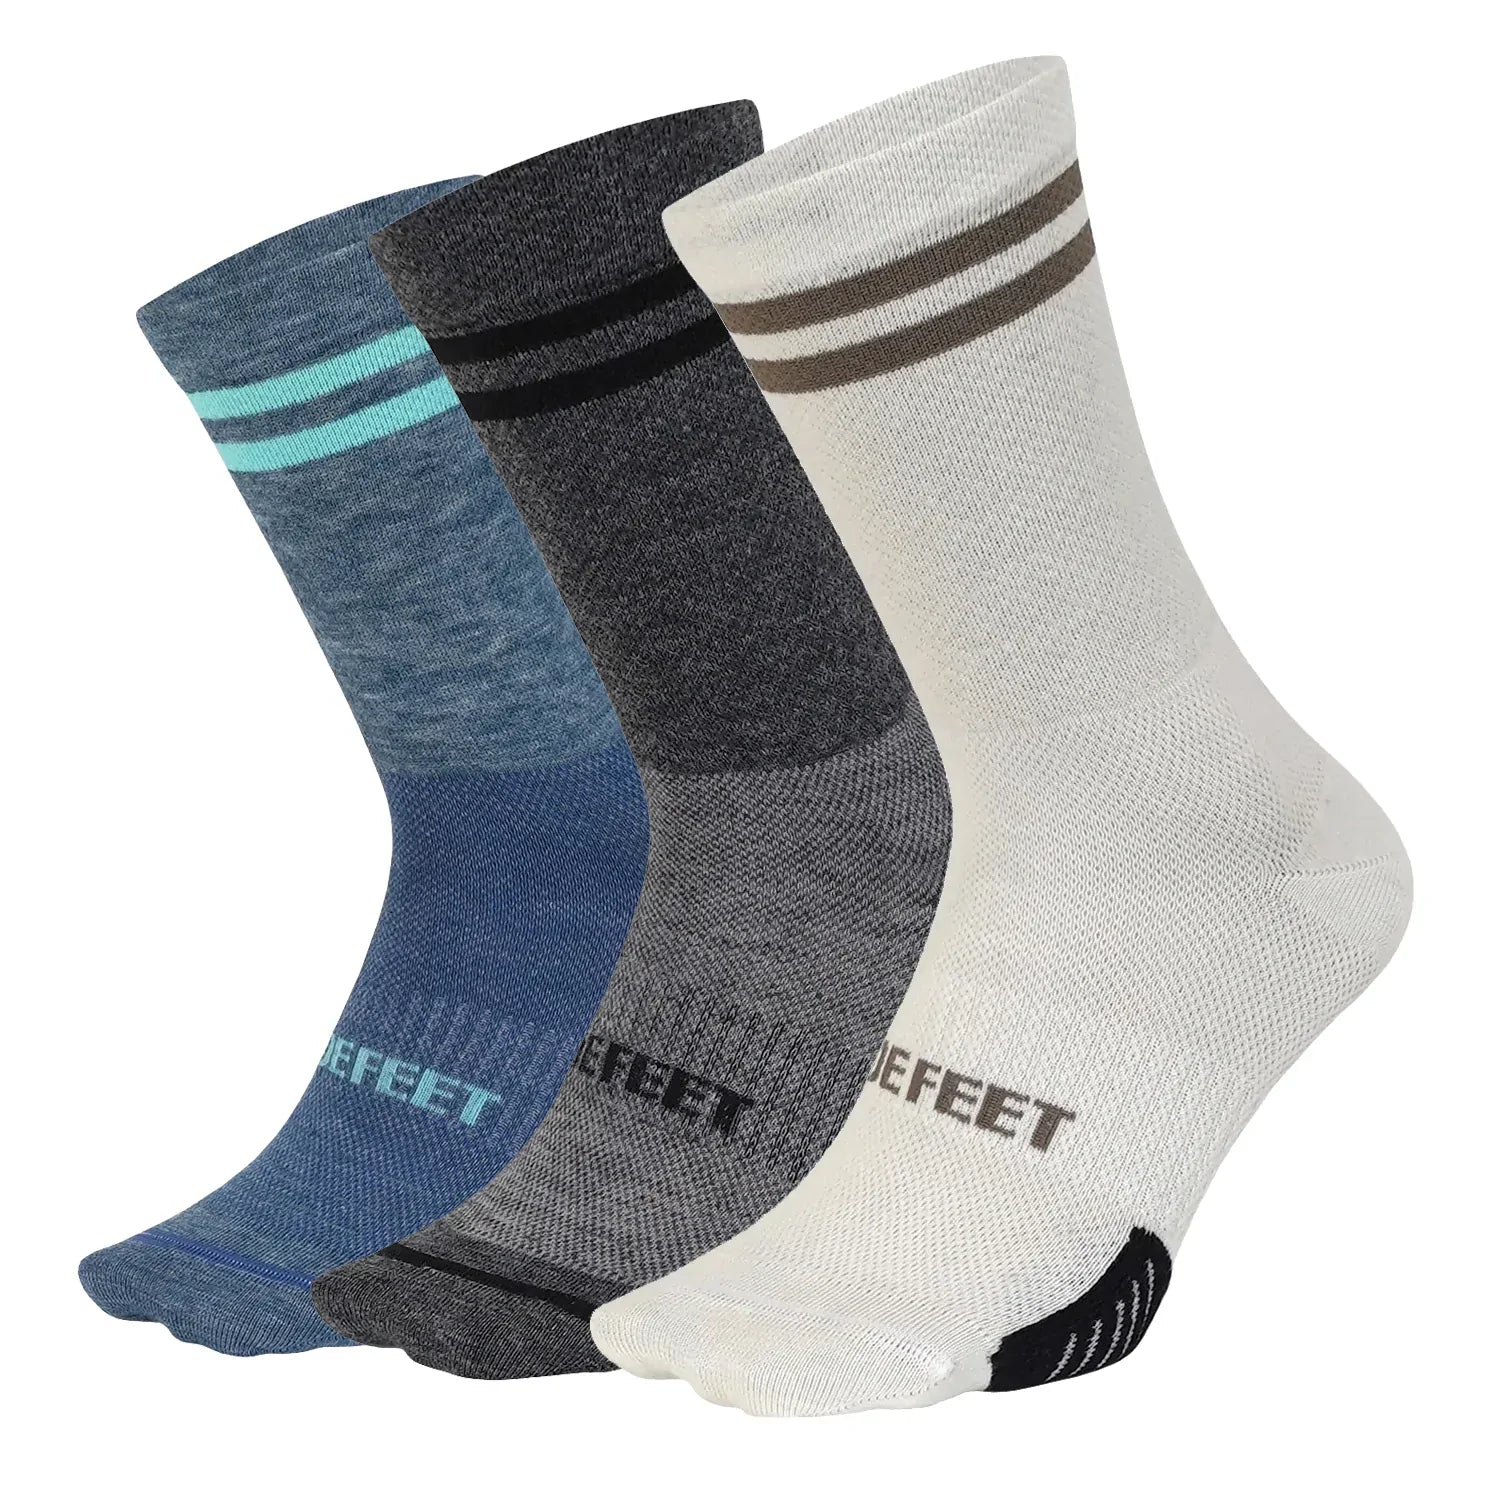 3 DeFeet Cyclismo cycling socks in blue, grey, and white with tonal double stripes on the cuff